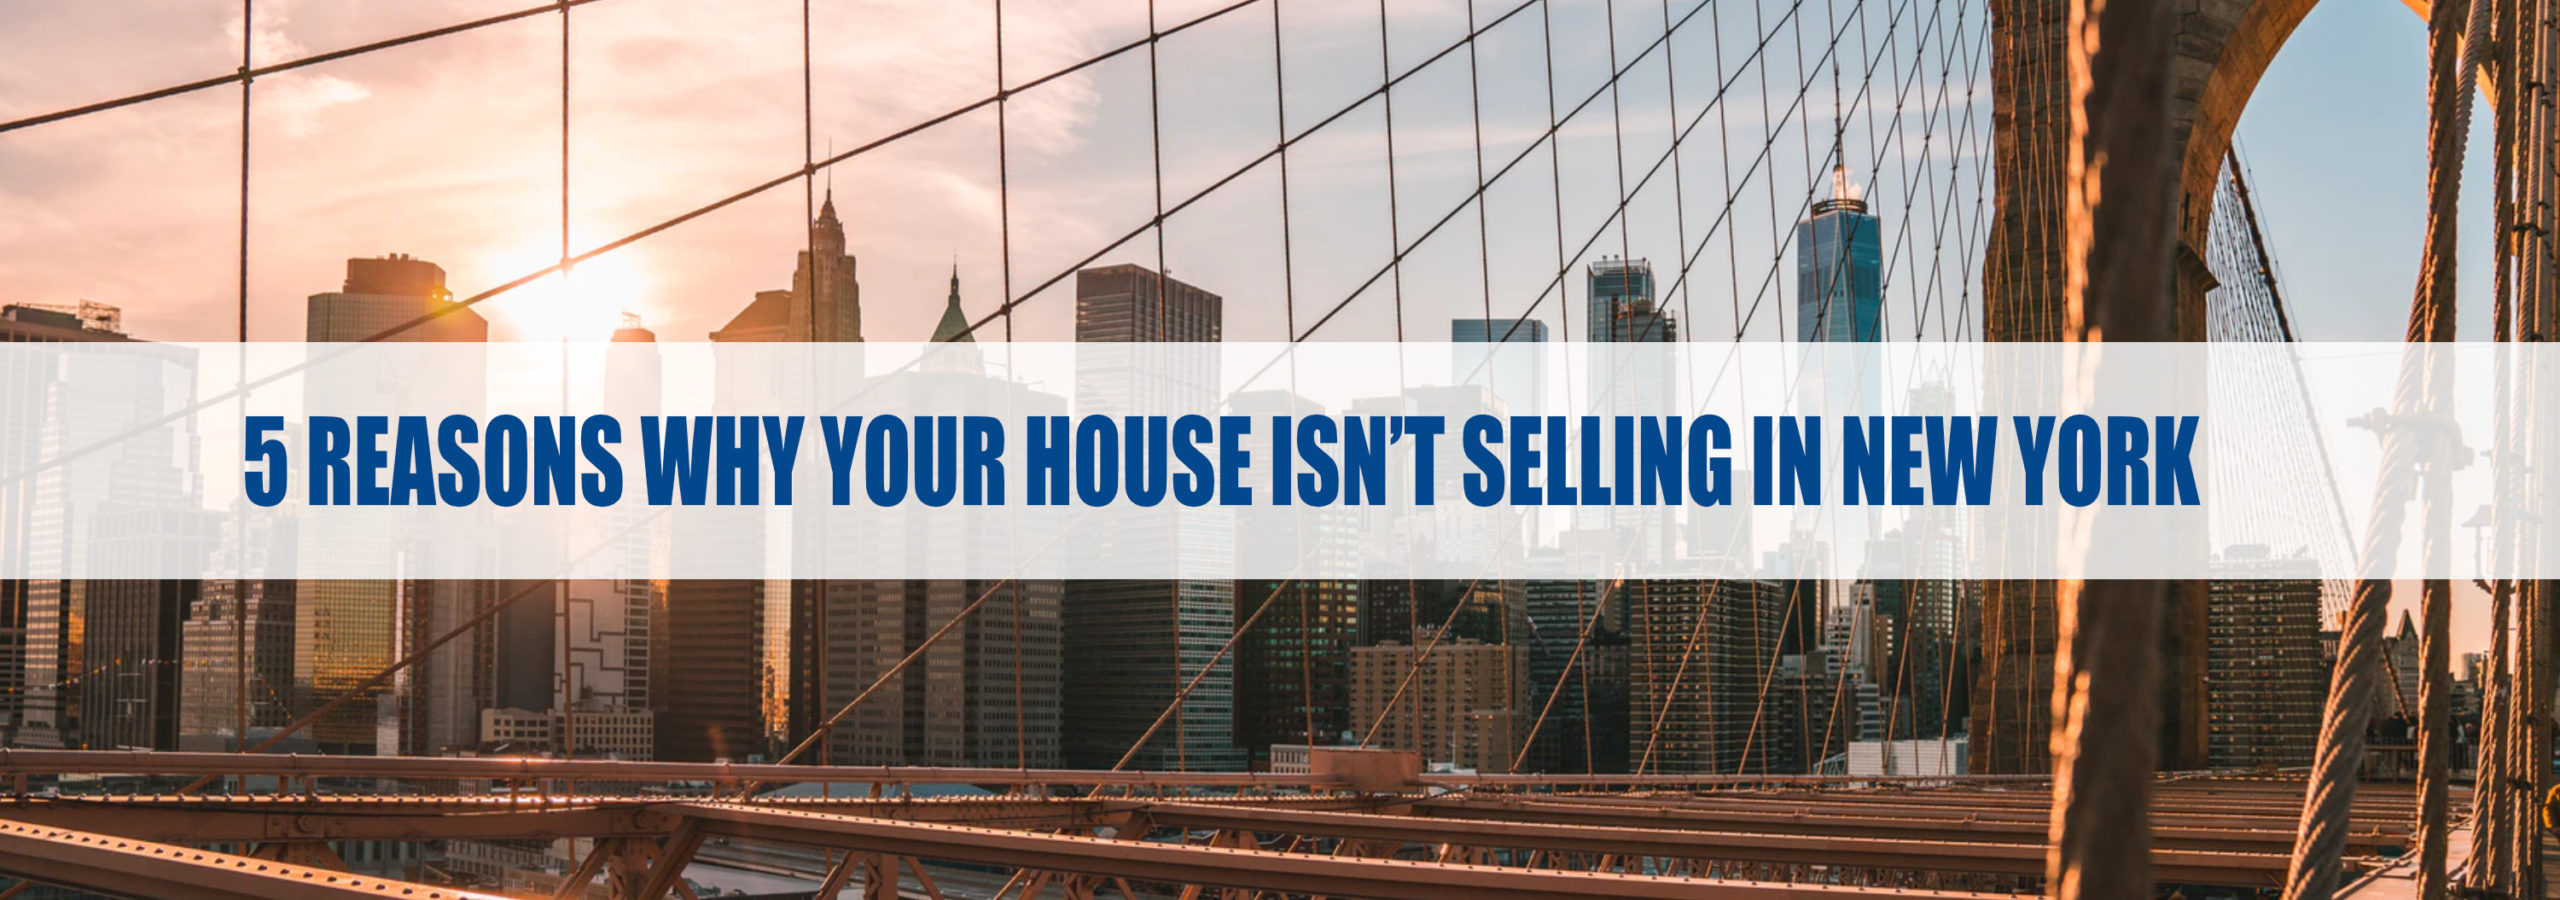 5 Reasons Why Your House Isn’t Selling in New York